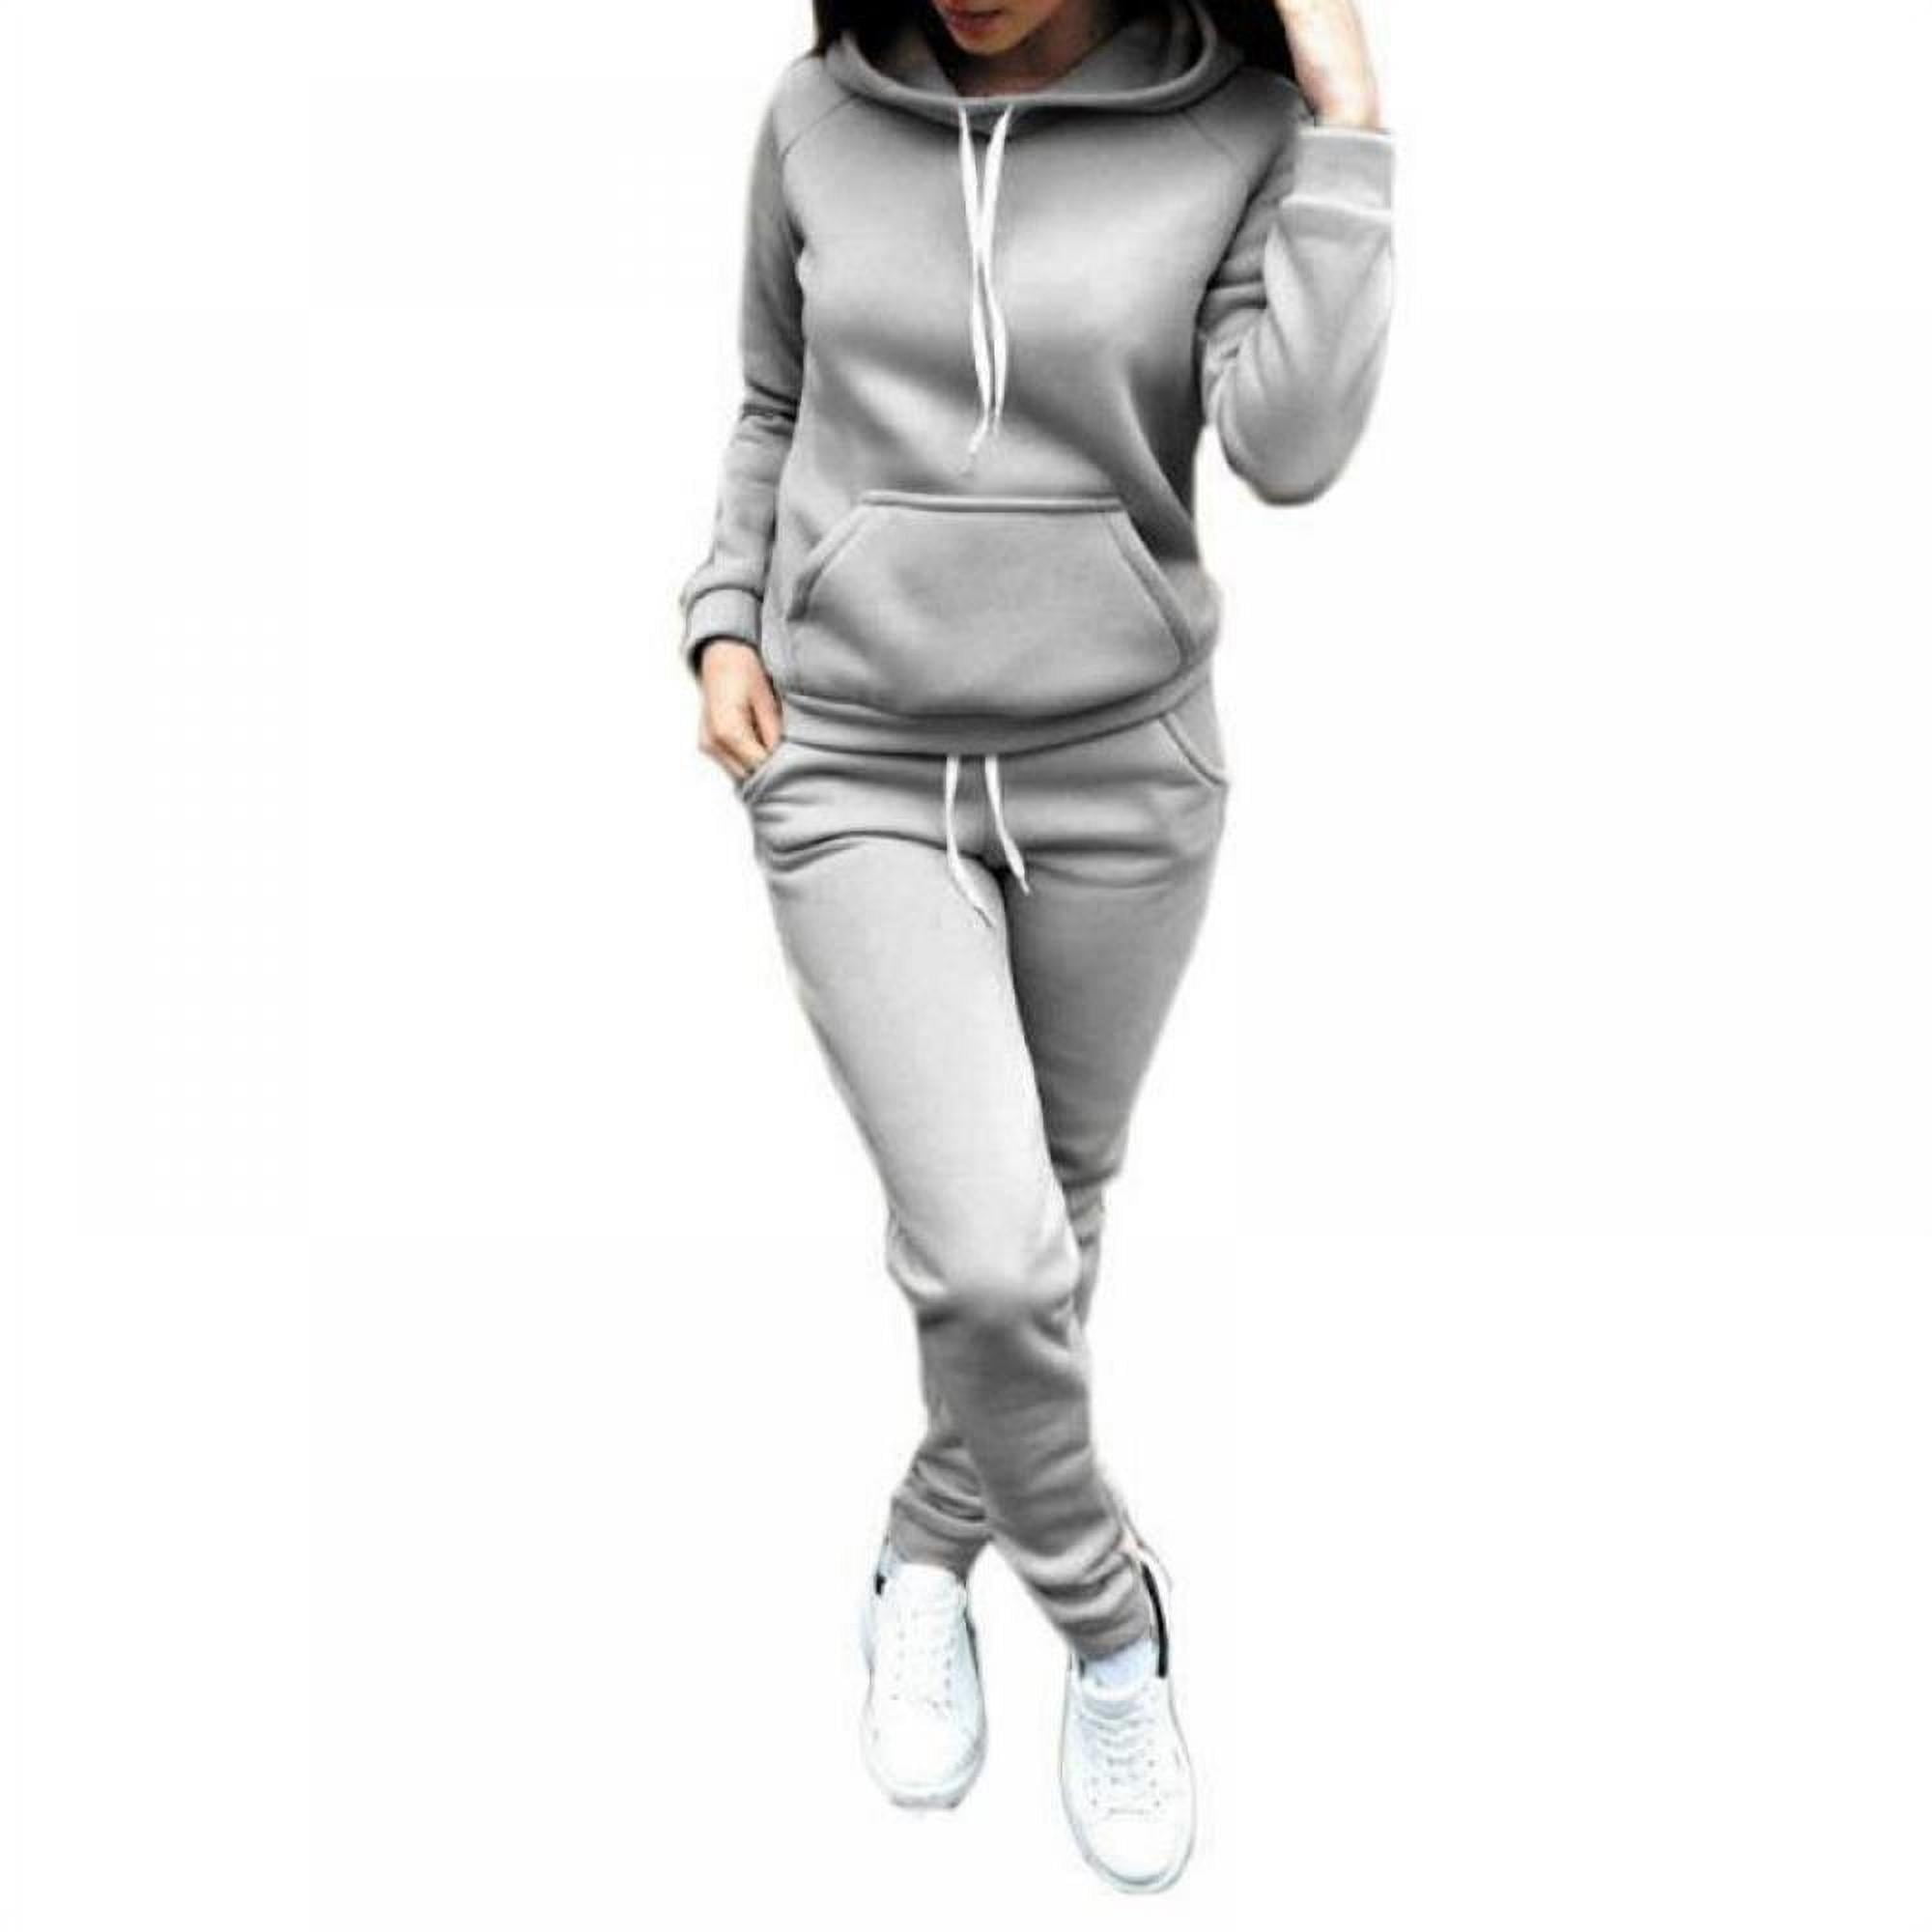  Jogging Suits for Women - Two Piece Sweatsuit Pullover Hoodie +  Long Pants Tracksuit Set Jumpsuits Small Black White : Sports & Outdoors